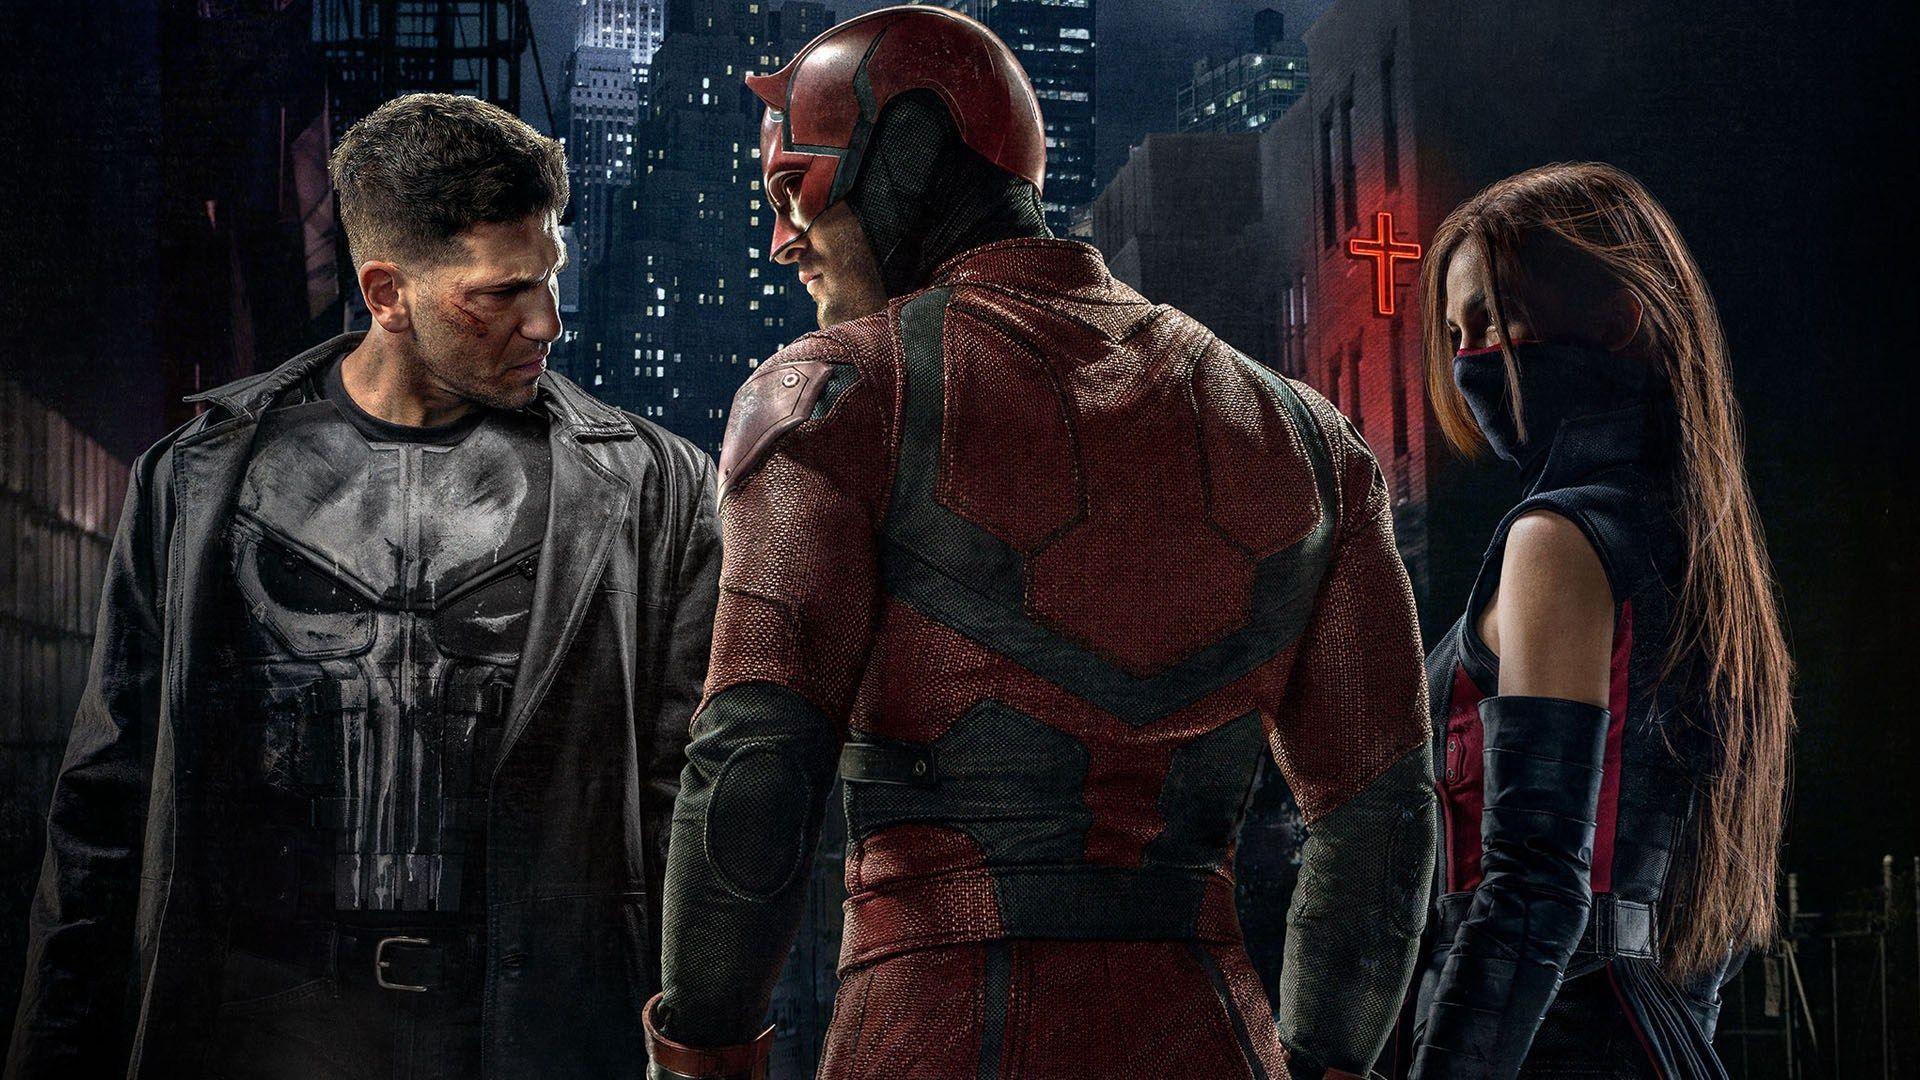 15 of the Best High Definition Daredevil Wallpapers